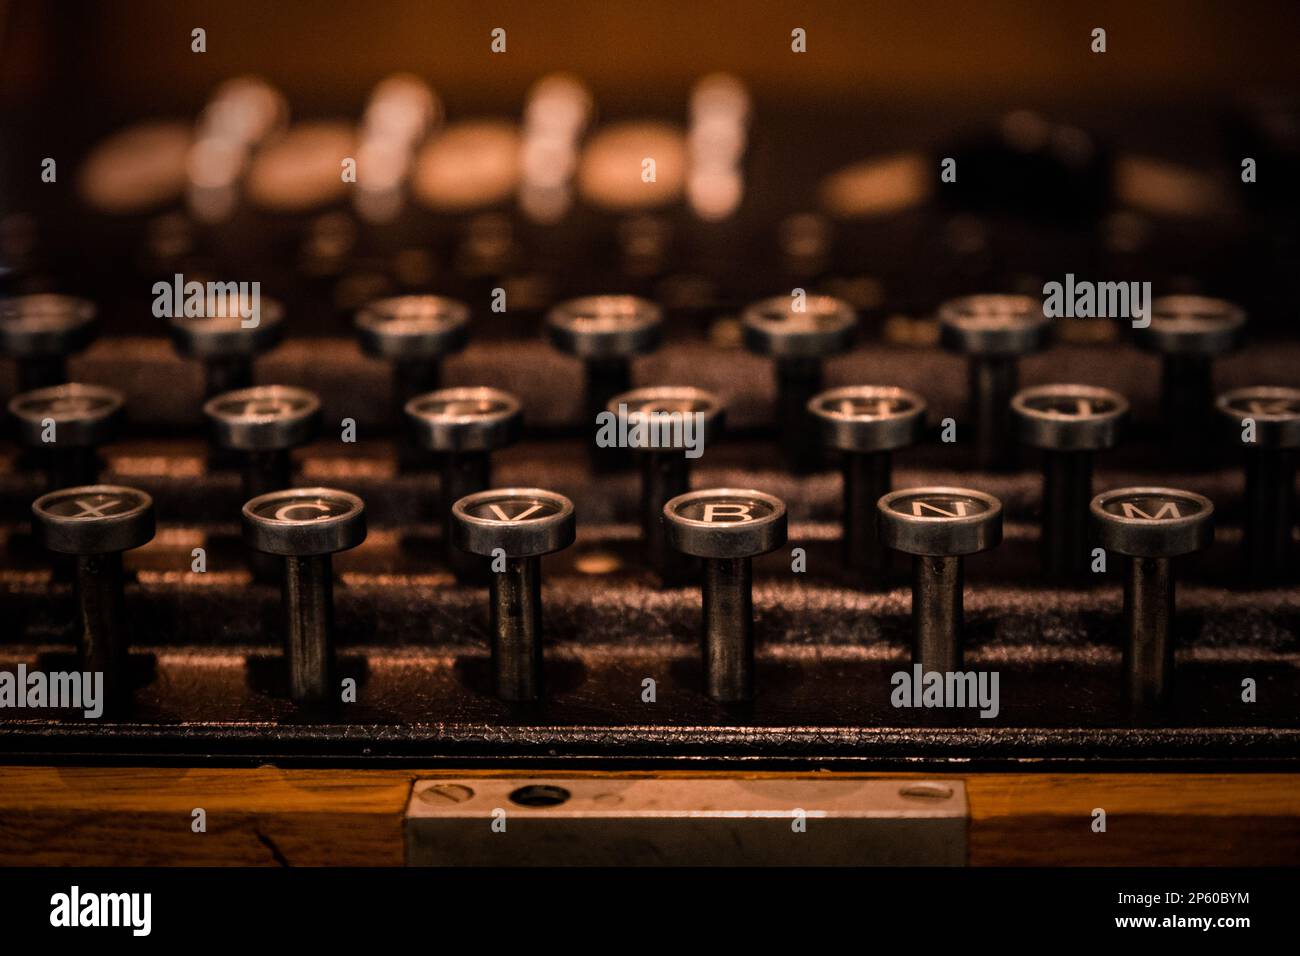 Rare German World War II naval 'Enigma' machine keyboard, bulbs and encryption rotors used by code breakers at Bletchley Park. Stock Photo